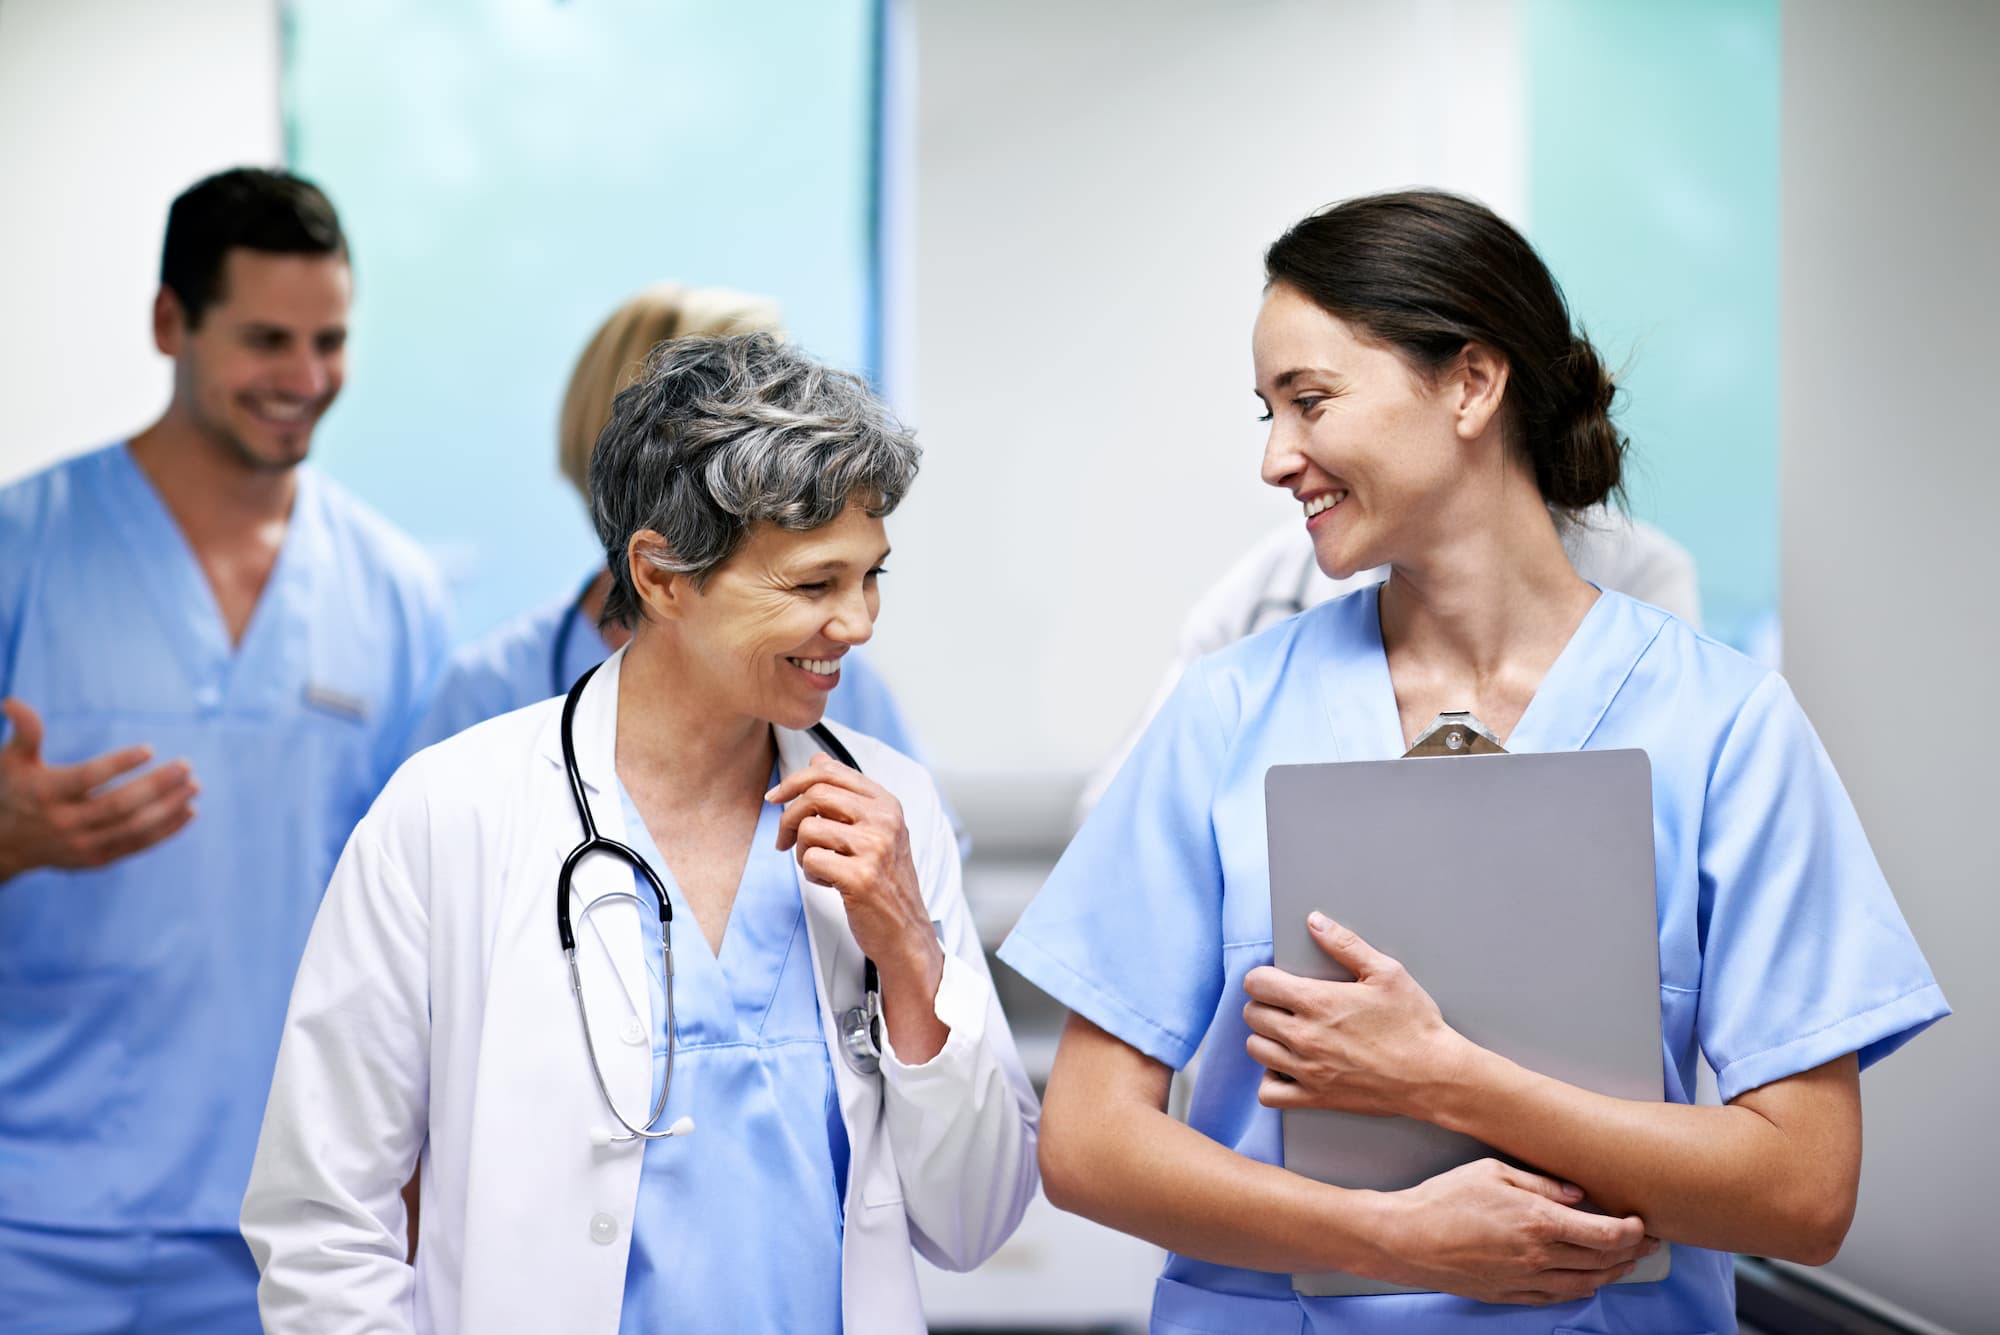 Generic stock photo of two female doctors.